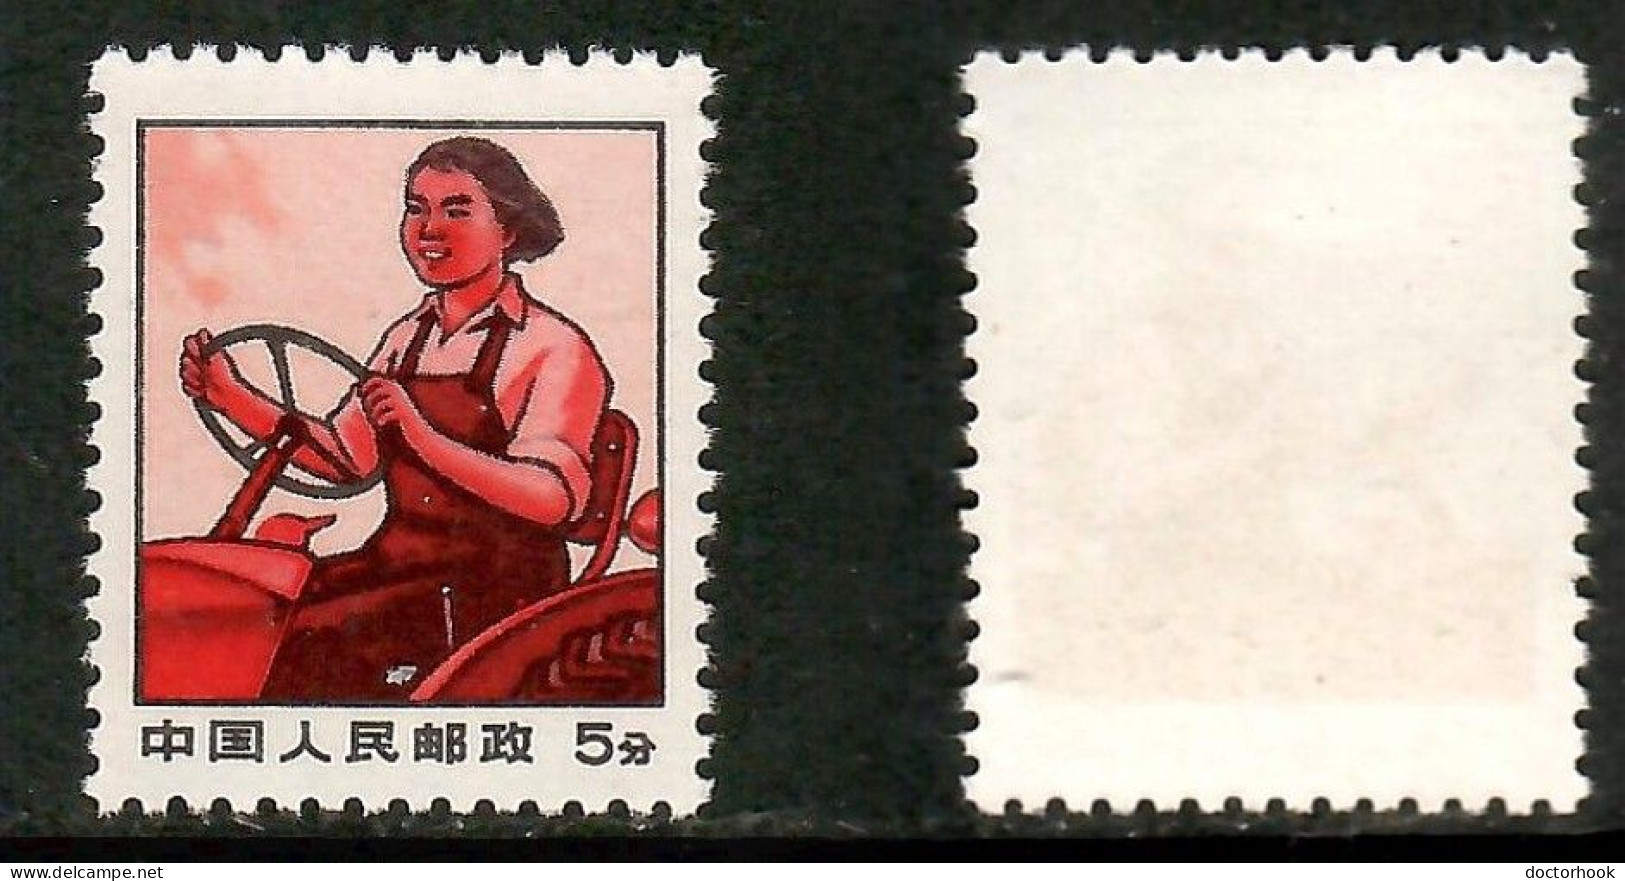 PEOPLES REPUBLIC Of CHINA   Scott # 1024* MINT NO GUM AS ISSUED (CONDITION AS PER SCAN) (Stamp Scan # 1012-4) - Ongebruikt